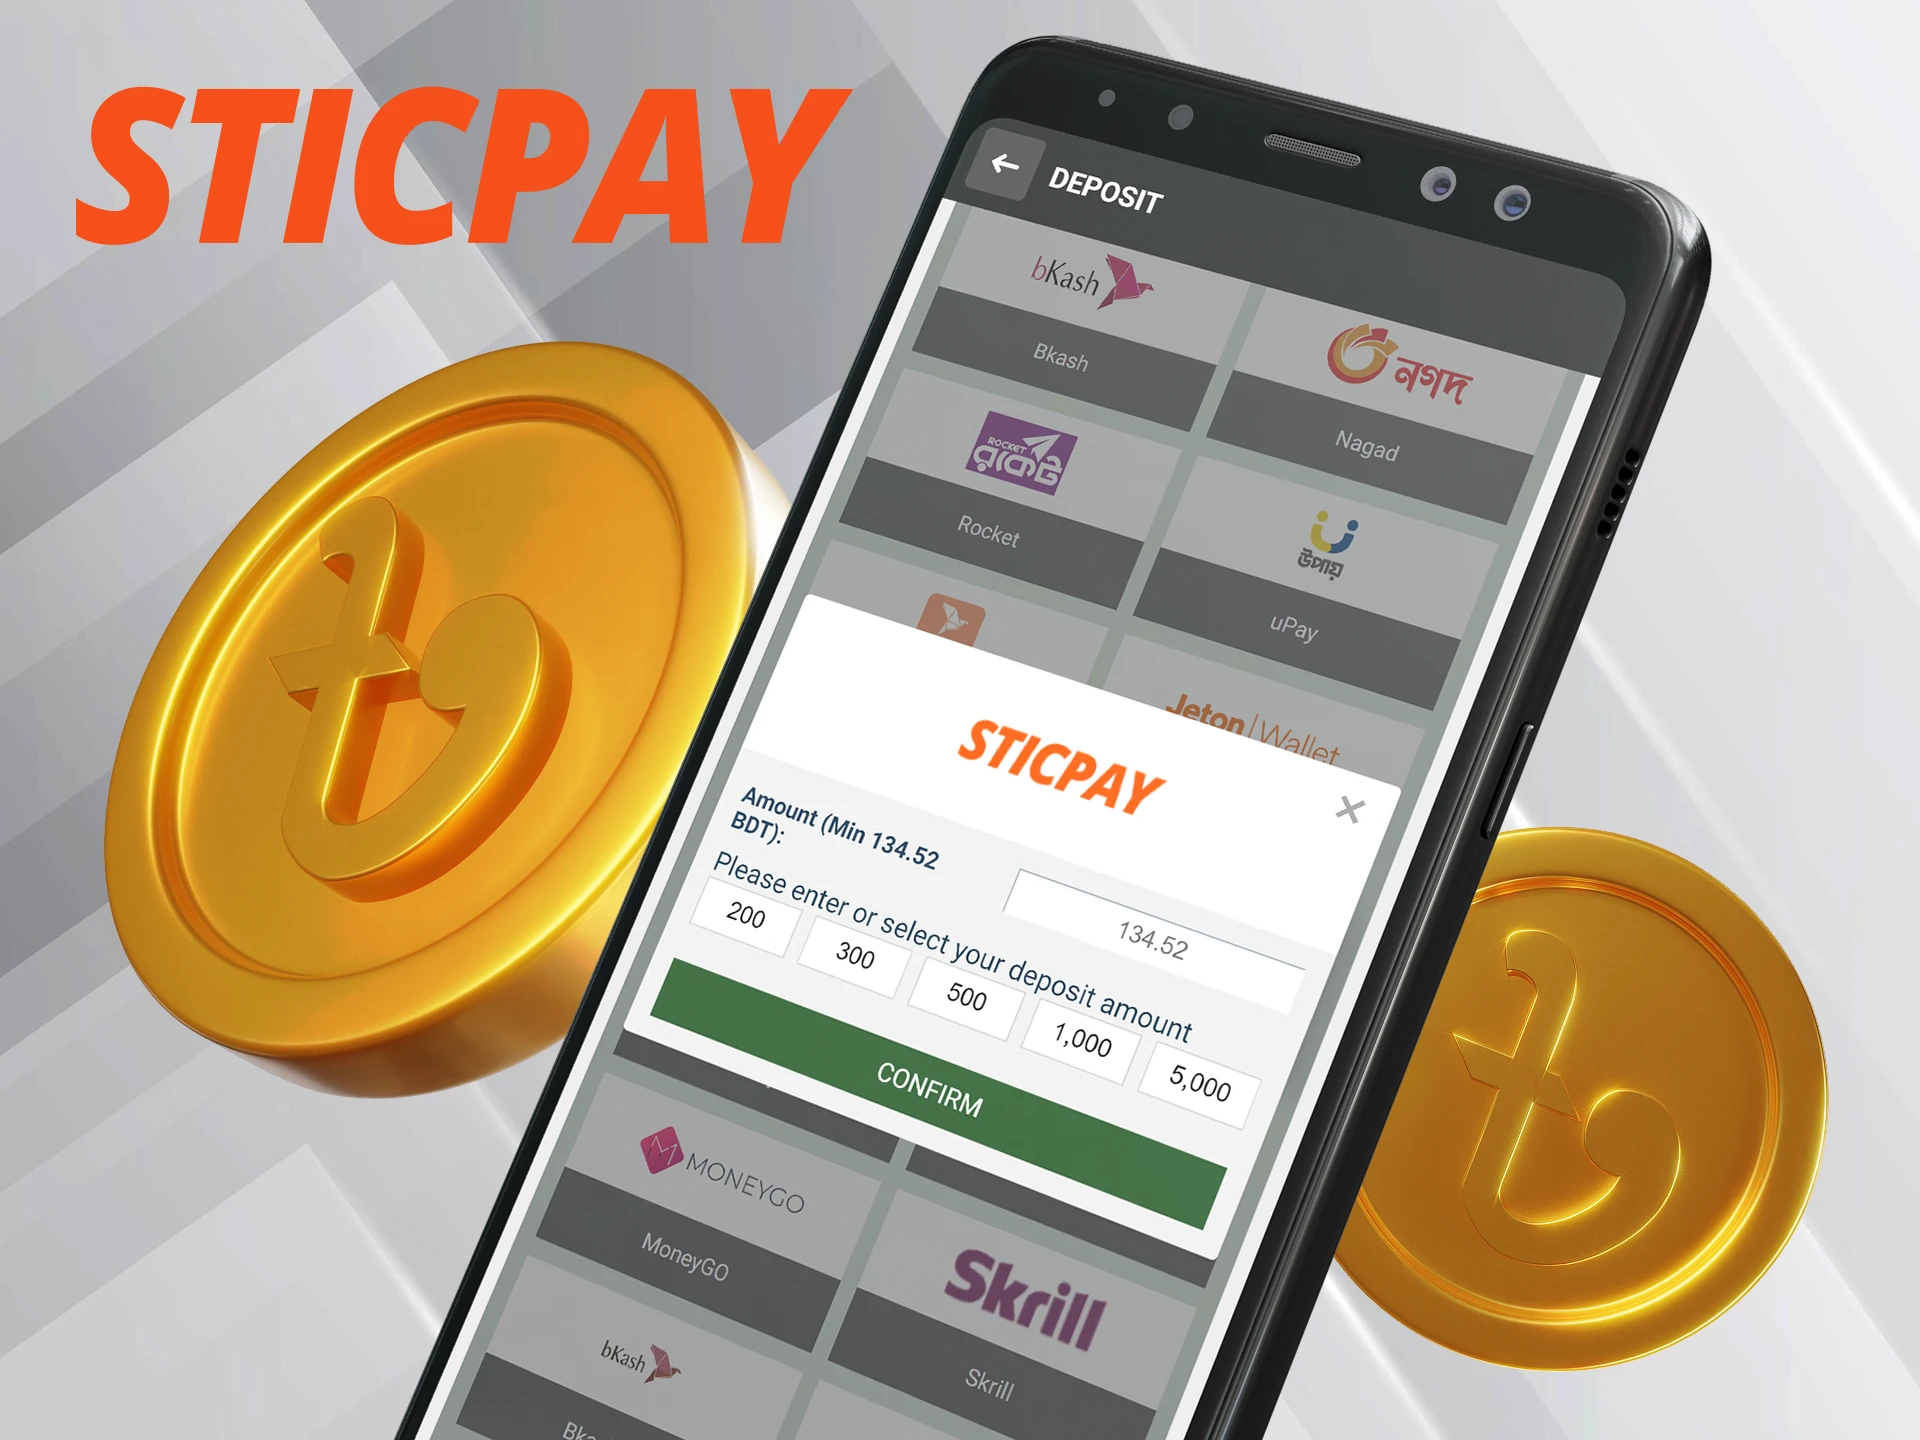 You can use the Sticpay payment system.